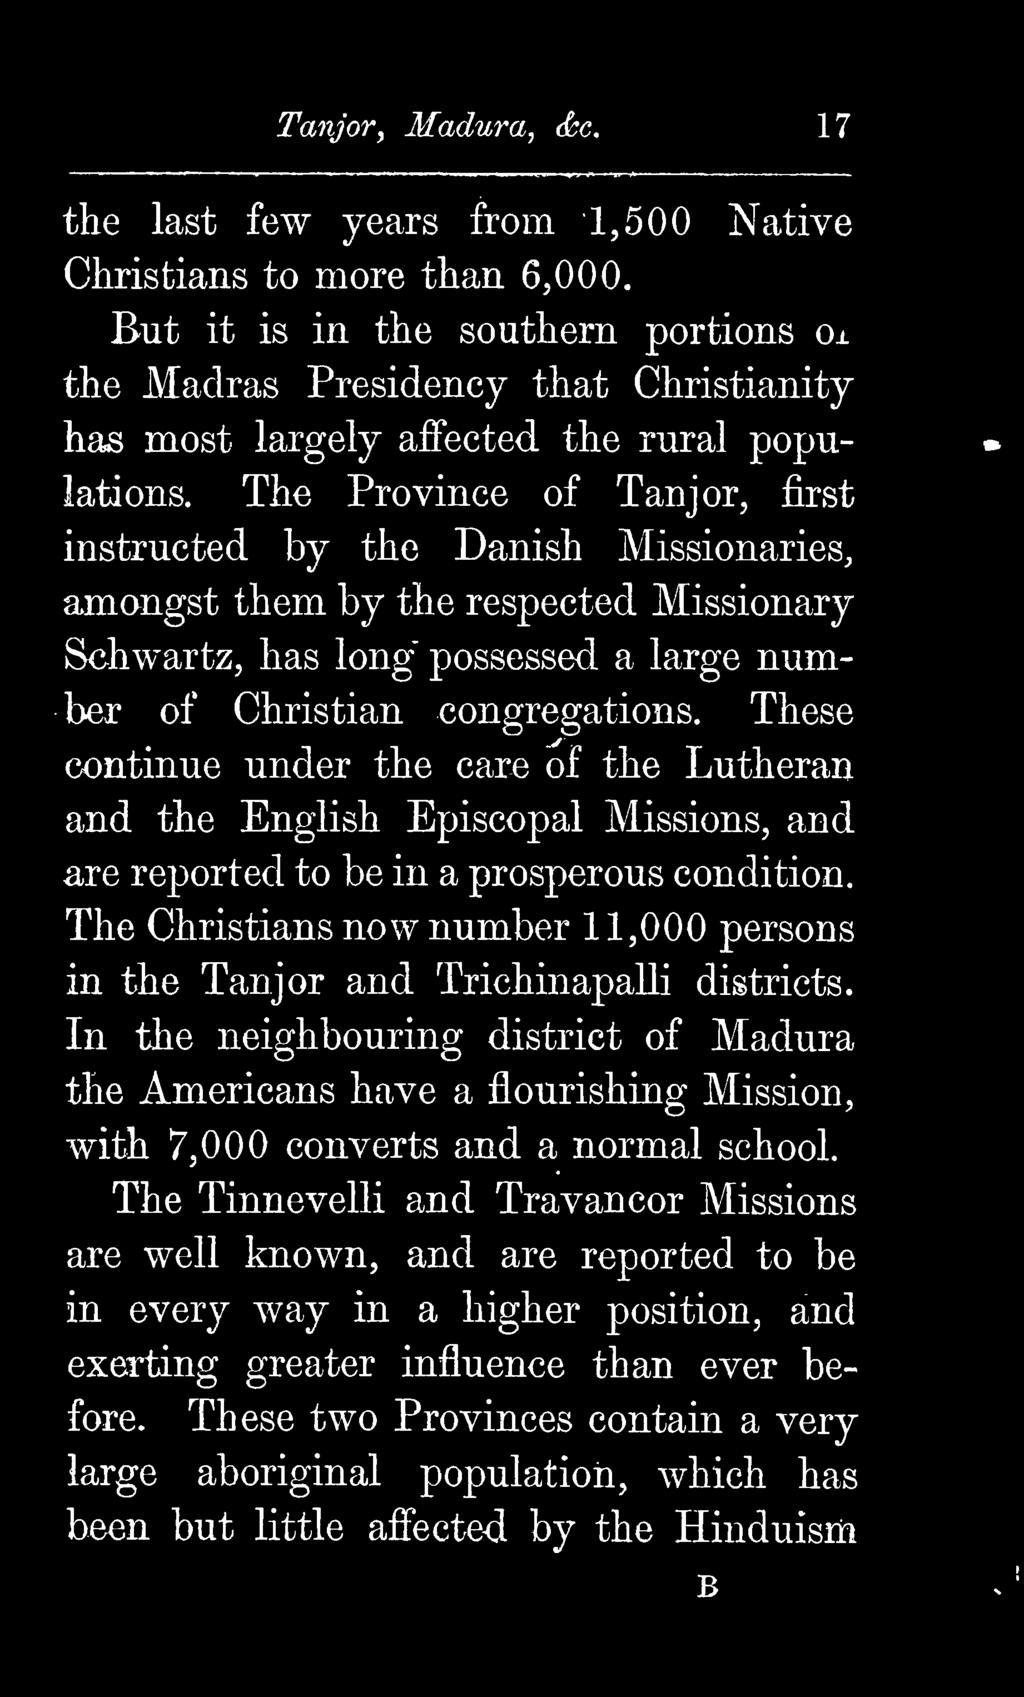 The Province of Tanjor, first instructed by the Danish Missionaries, amangst them by the respected Missionary Schwartz, has long possessed a large number of Christian congregations.